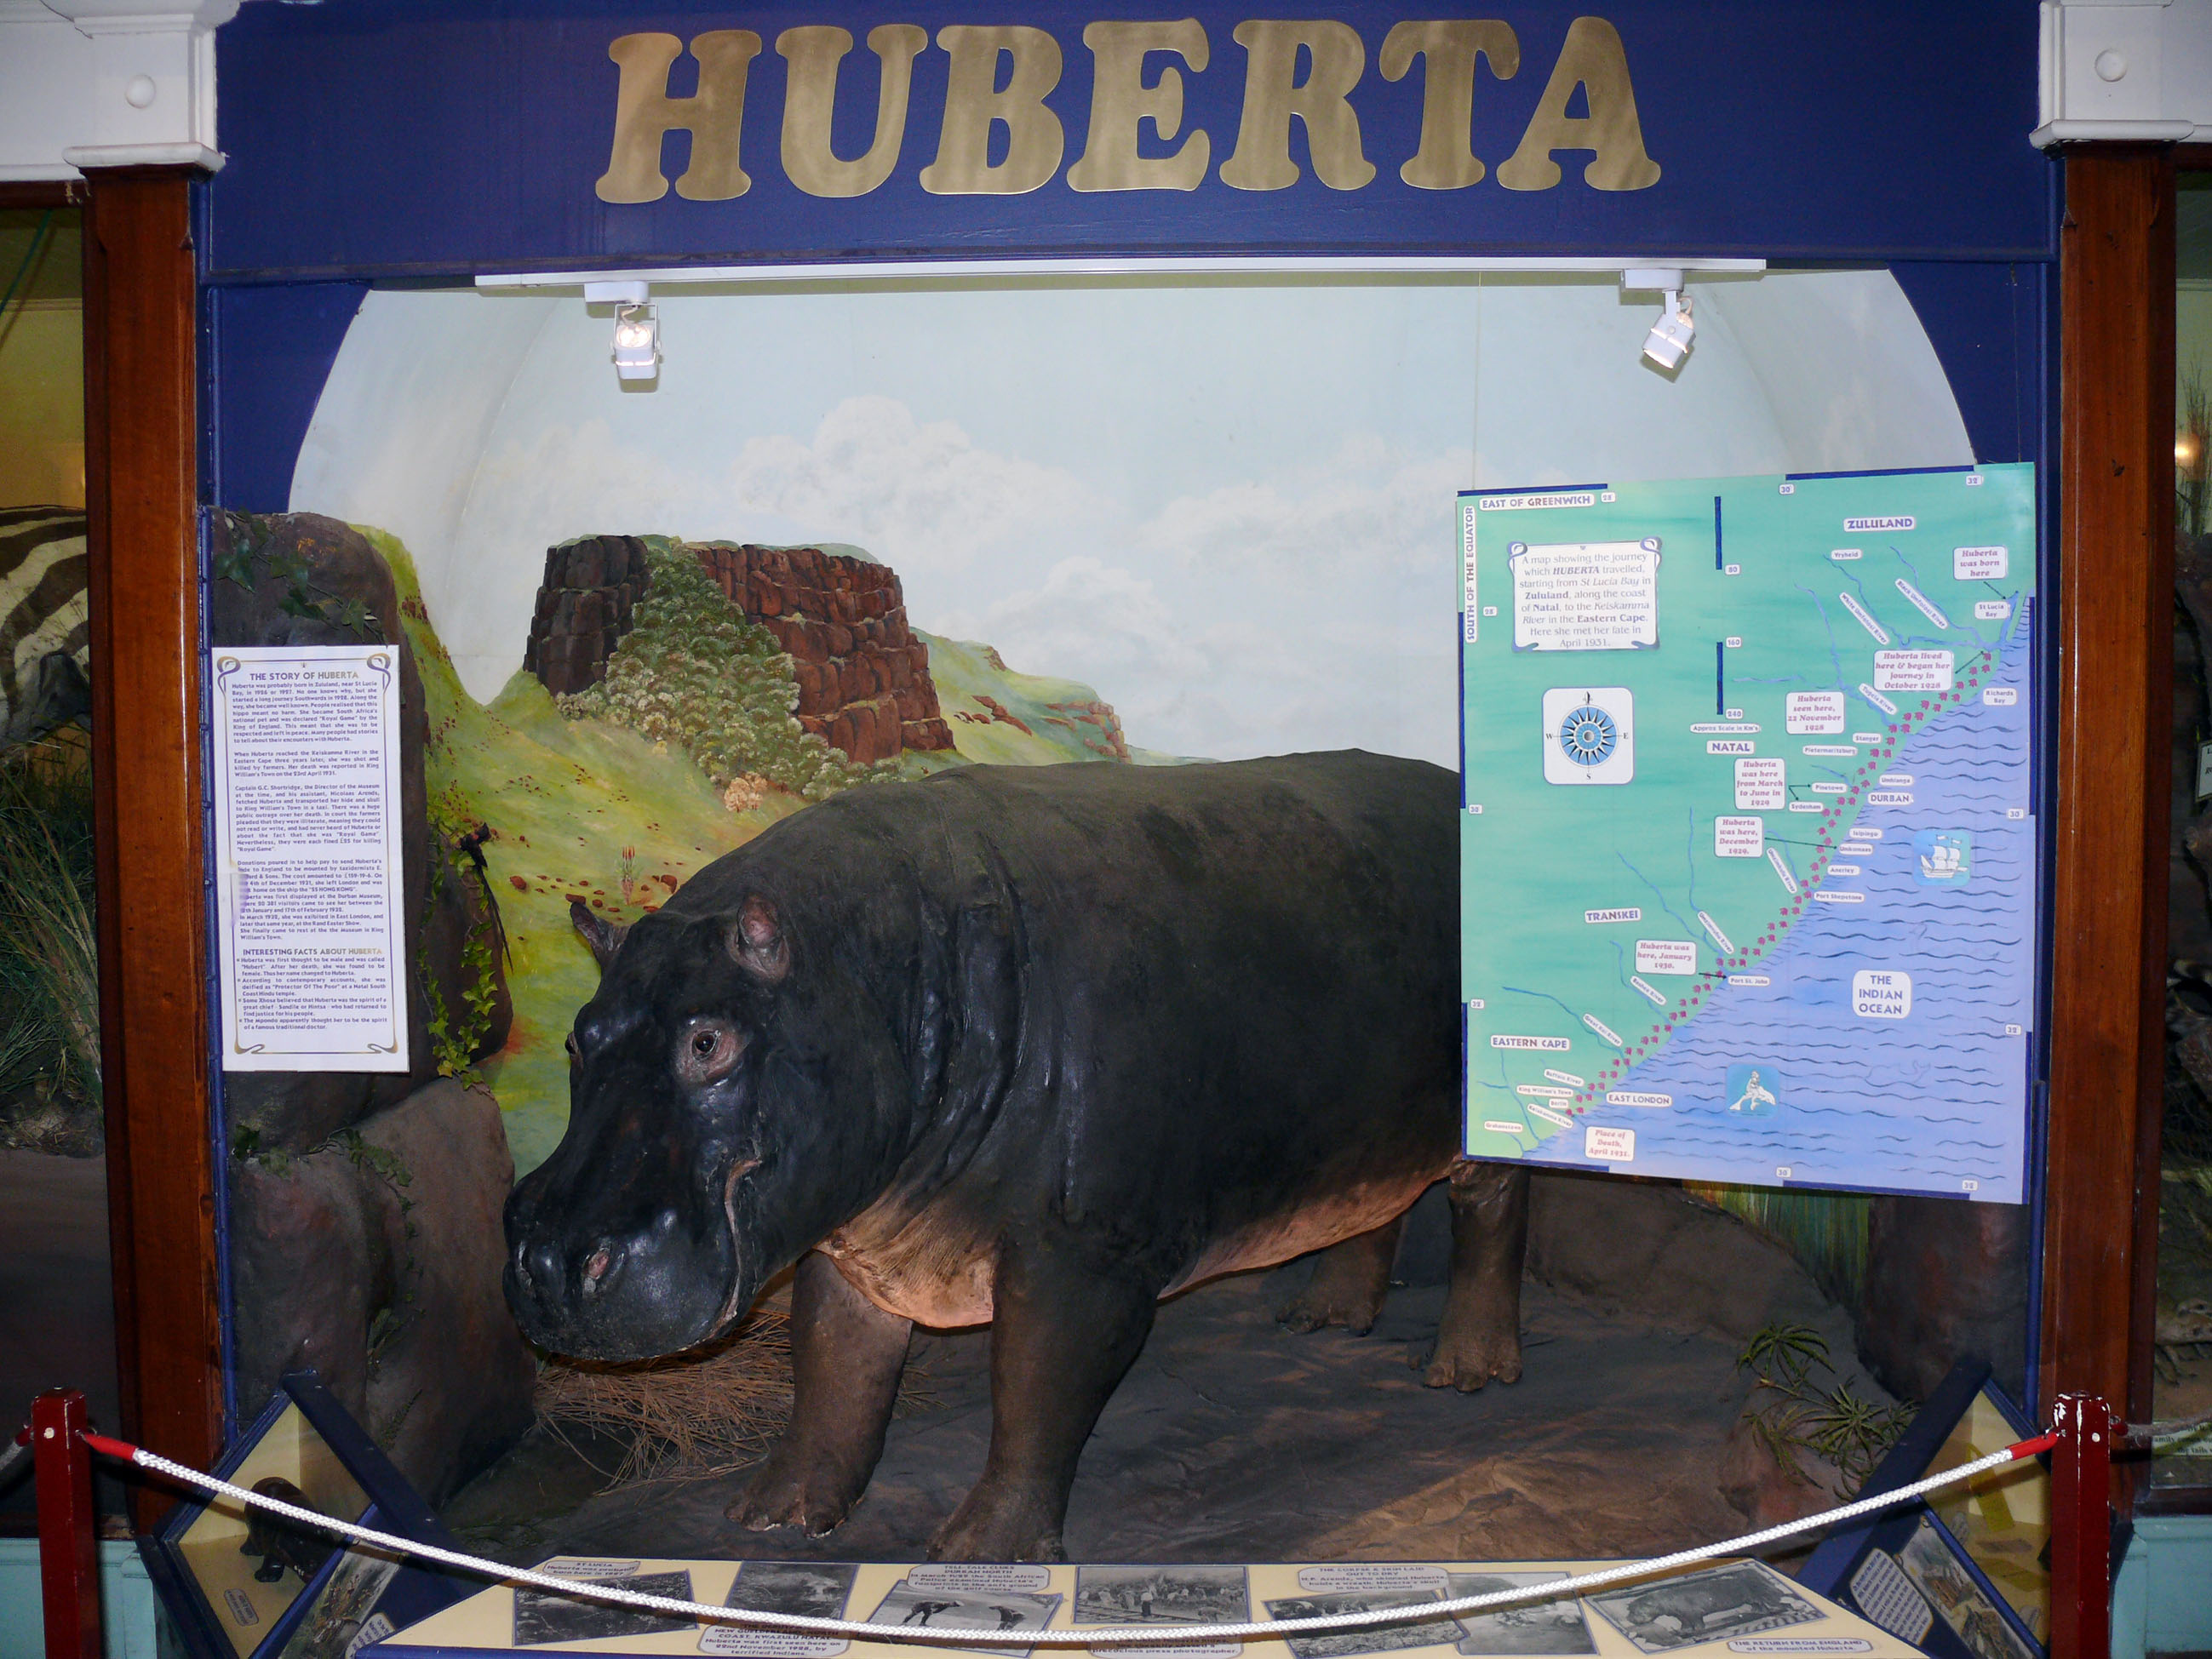 Huberta the Hippo captivated a nation with her adventures. Photo: Morné van Rooyen, Attribution, via Wikimedia Commons